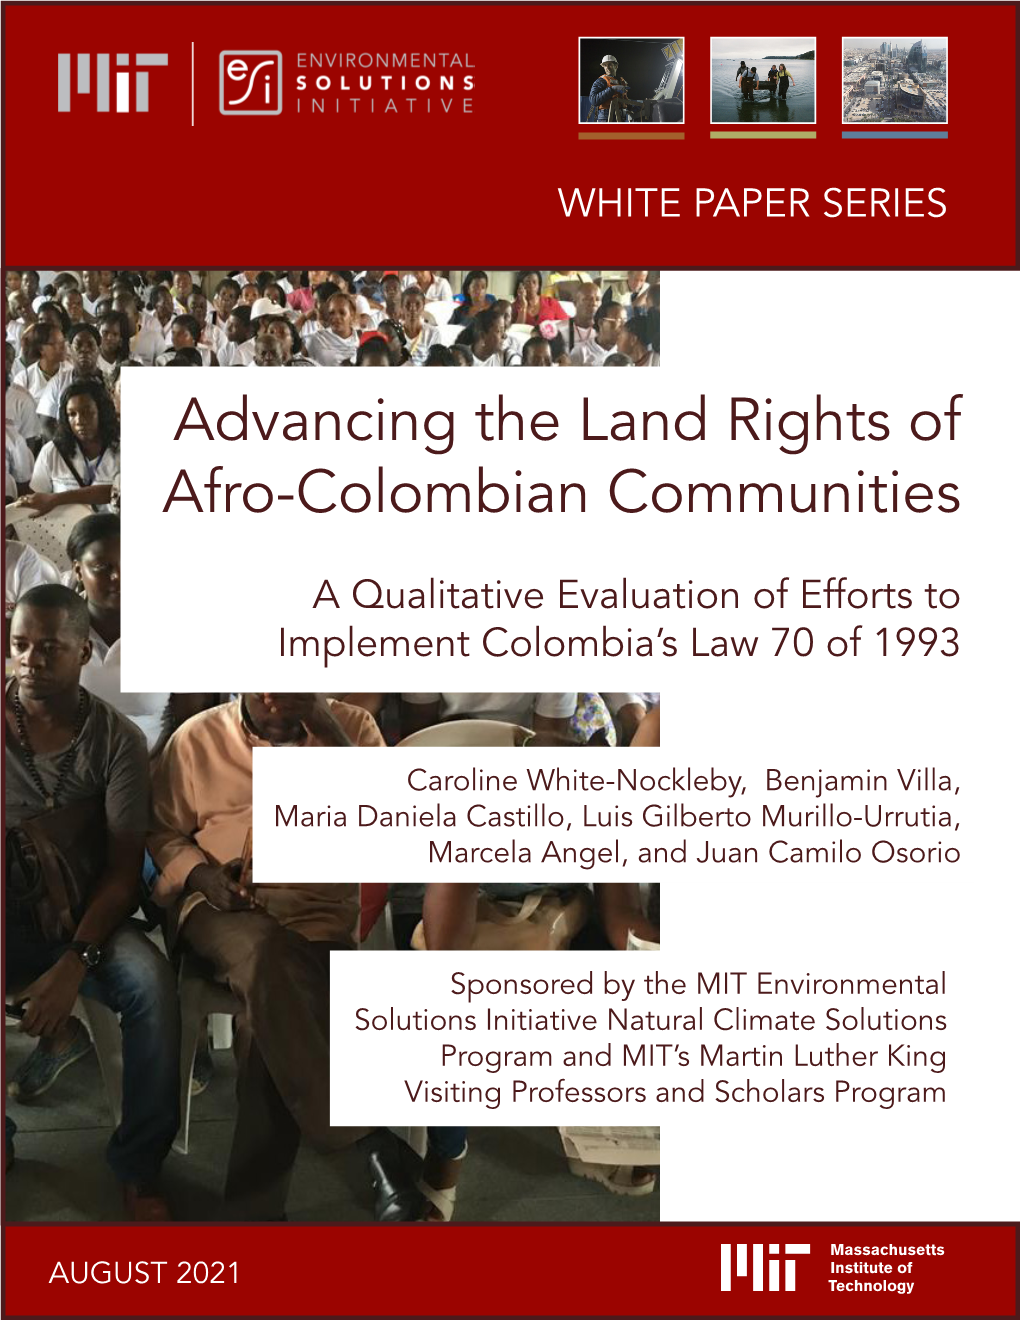 Advancing the Land Rights of Afro-Colombian Communities